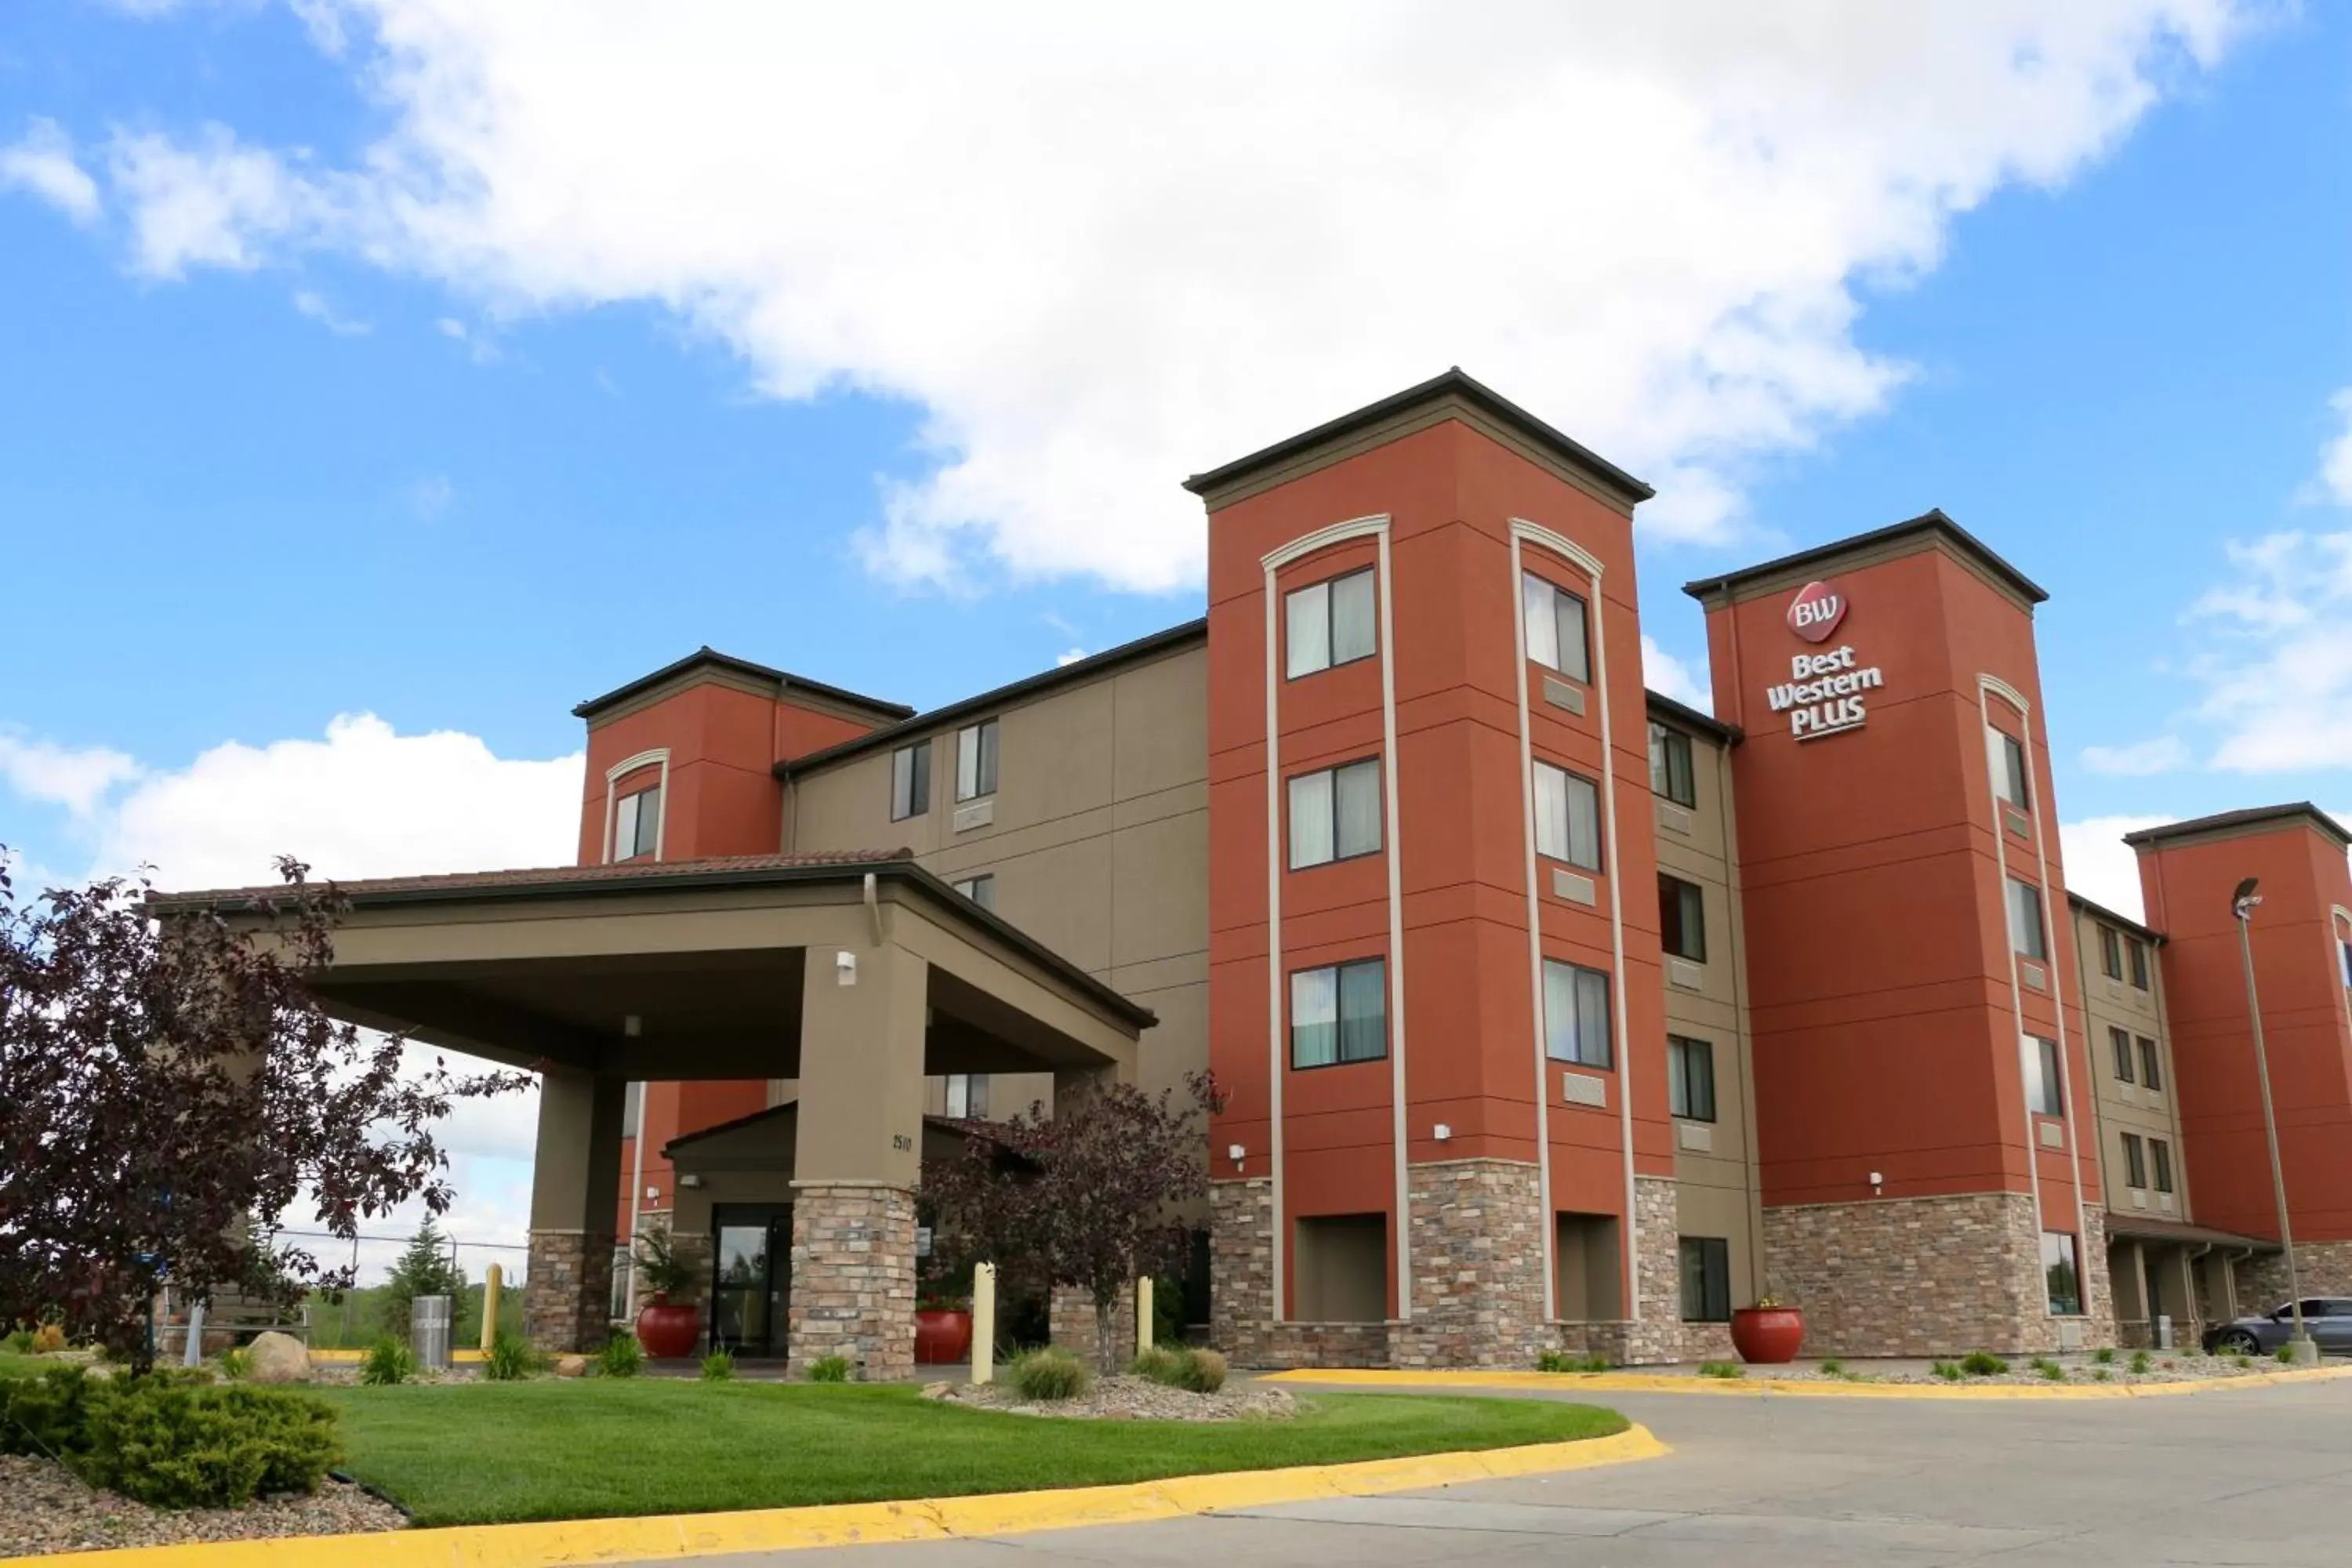 Facade/entrance, Property Building in Best Western Plus Omaha Airport Inn